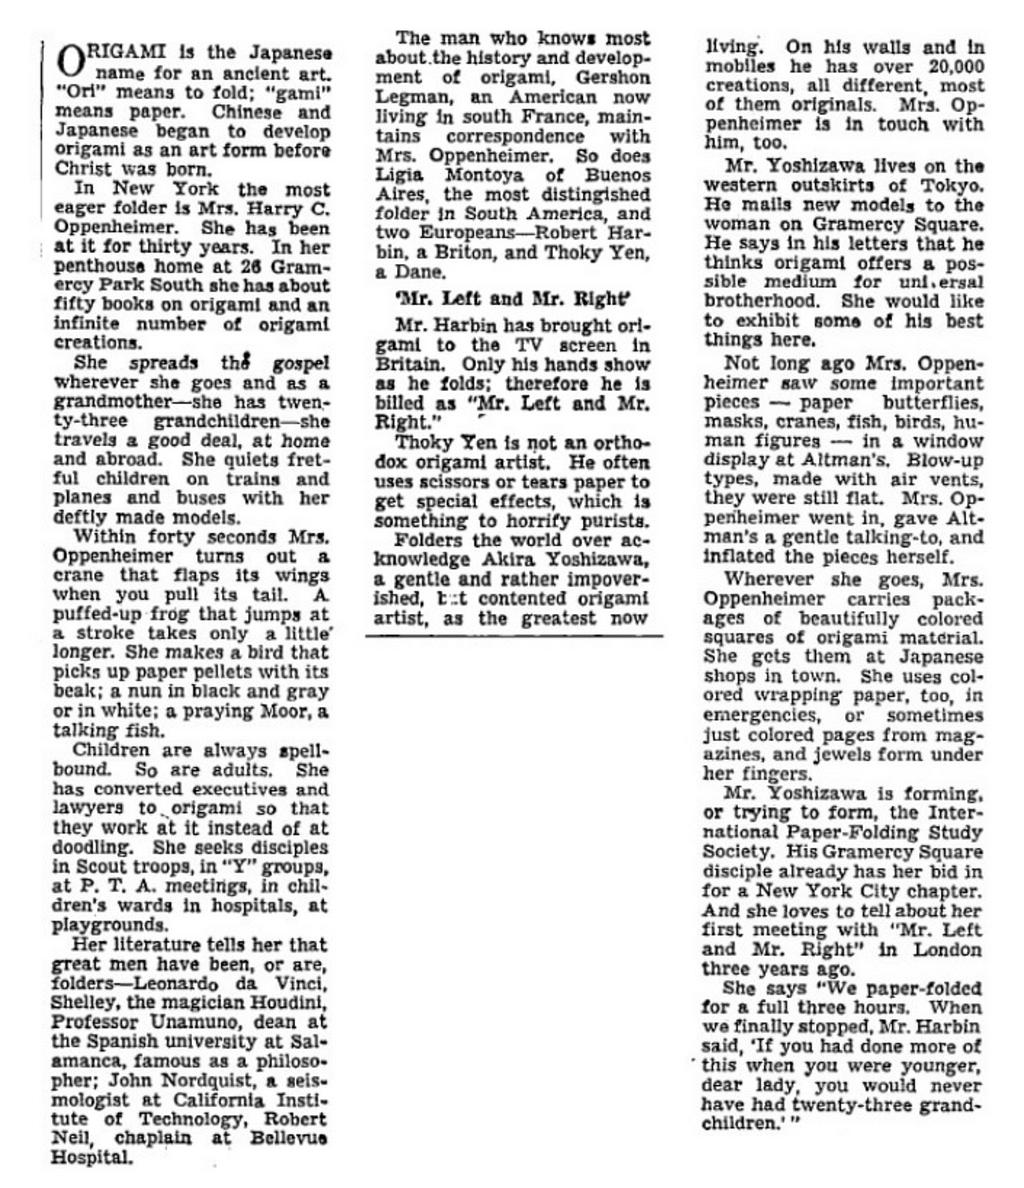 The 1958 New York Times clip, featuring the fateful article that brought Lillian Oppenheimer and origami into the American spotlight.